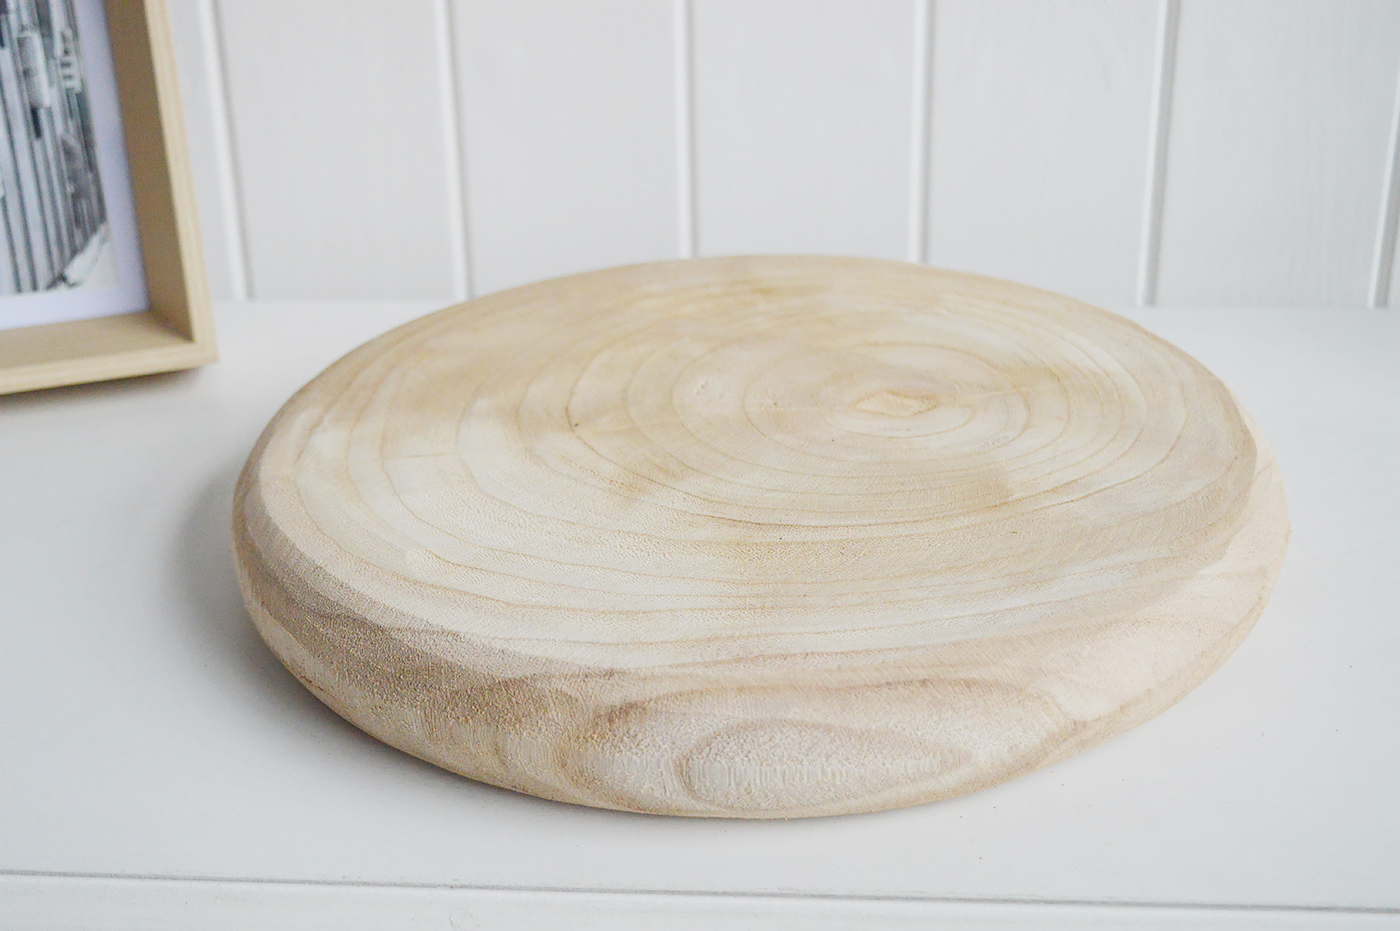 Canterbury Round Wooden Tray The White, Round Wooden Tray With Handles Uk